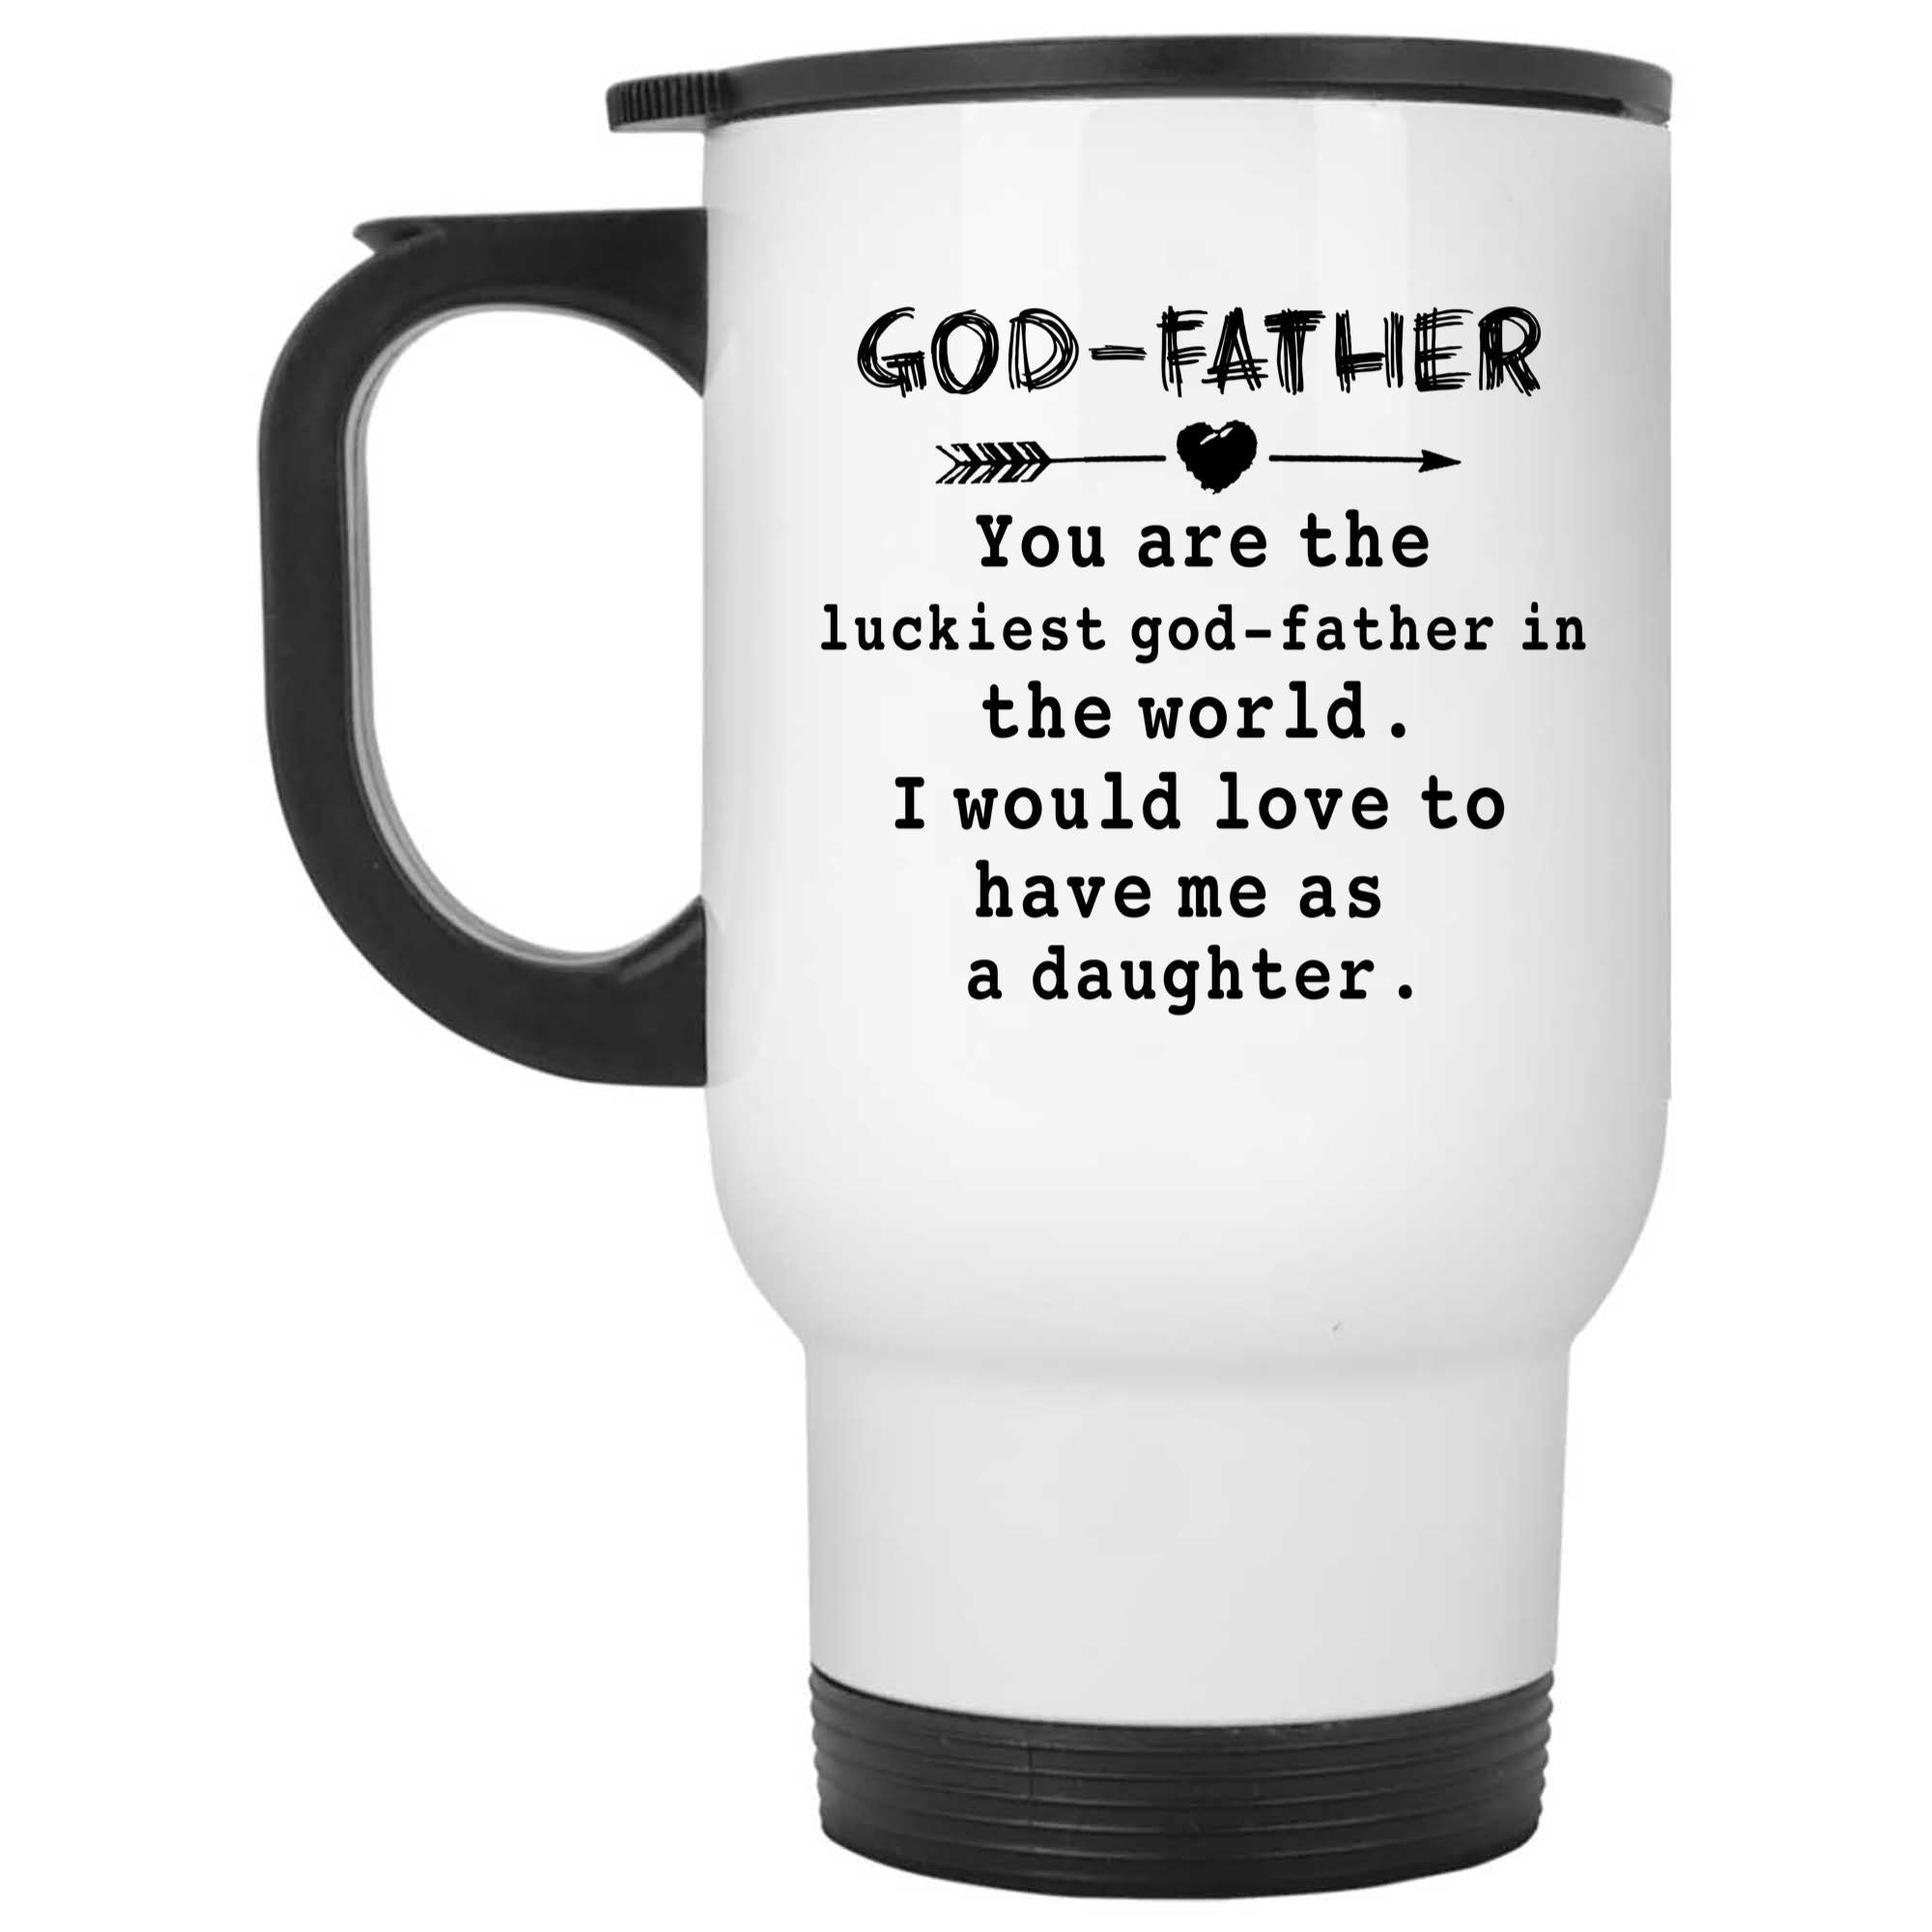 Skitongifts Funny Ceramic Novelty Coffee Mug You're The Luckiest God-Father In The World. I Would Love To Have Me As A Daughter Father's Day Gifts